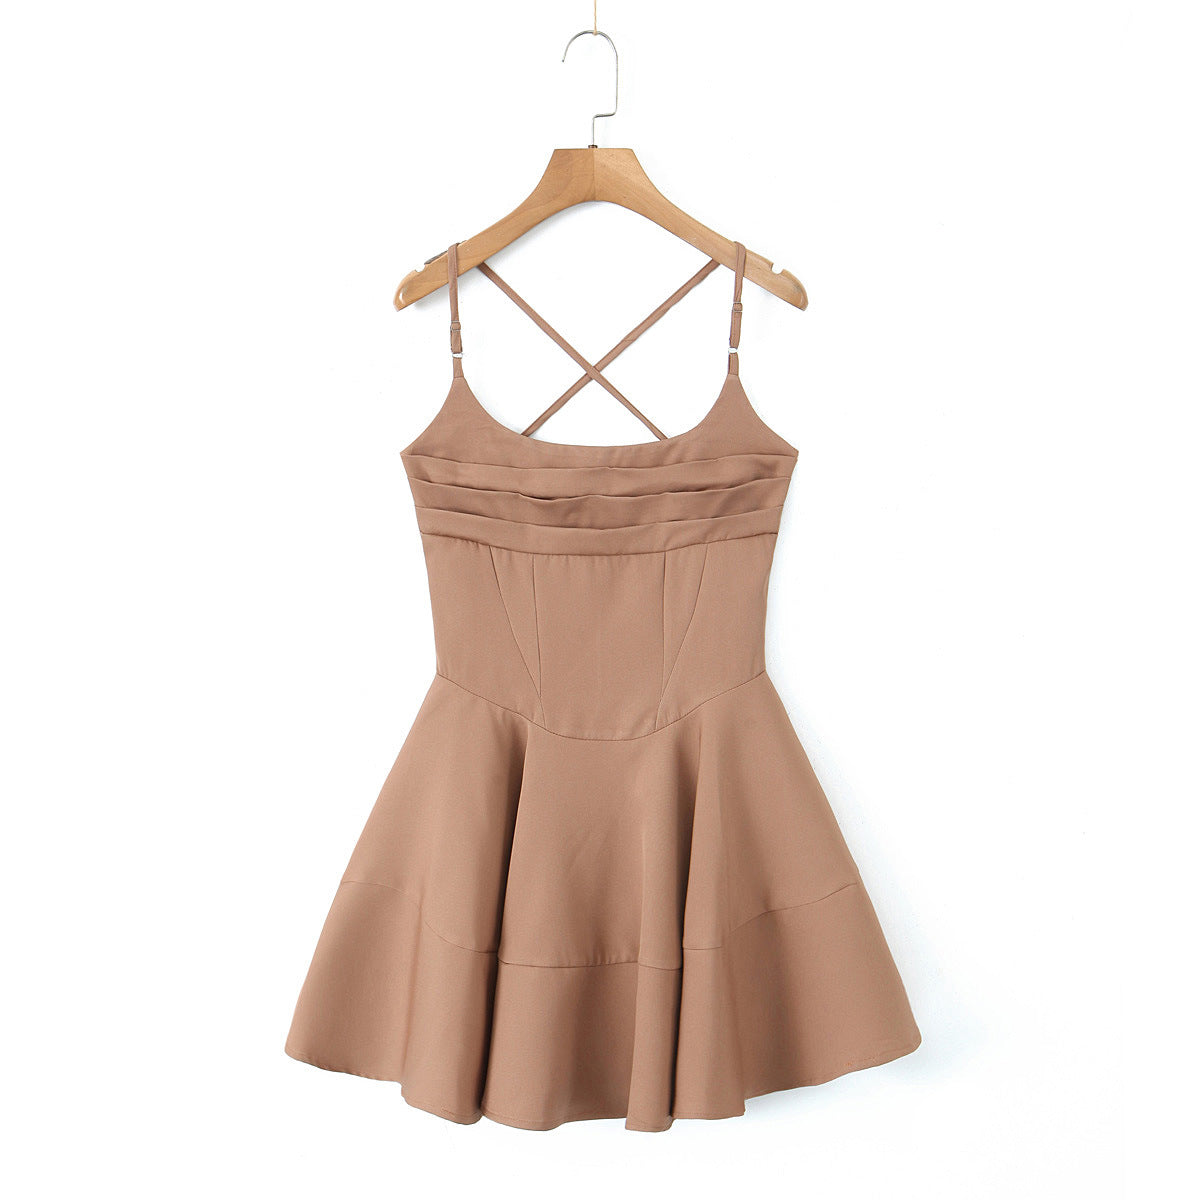 Simple and Stylish Backcross Dress